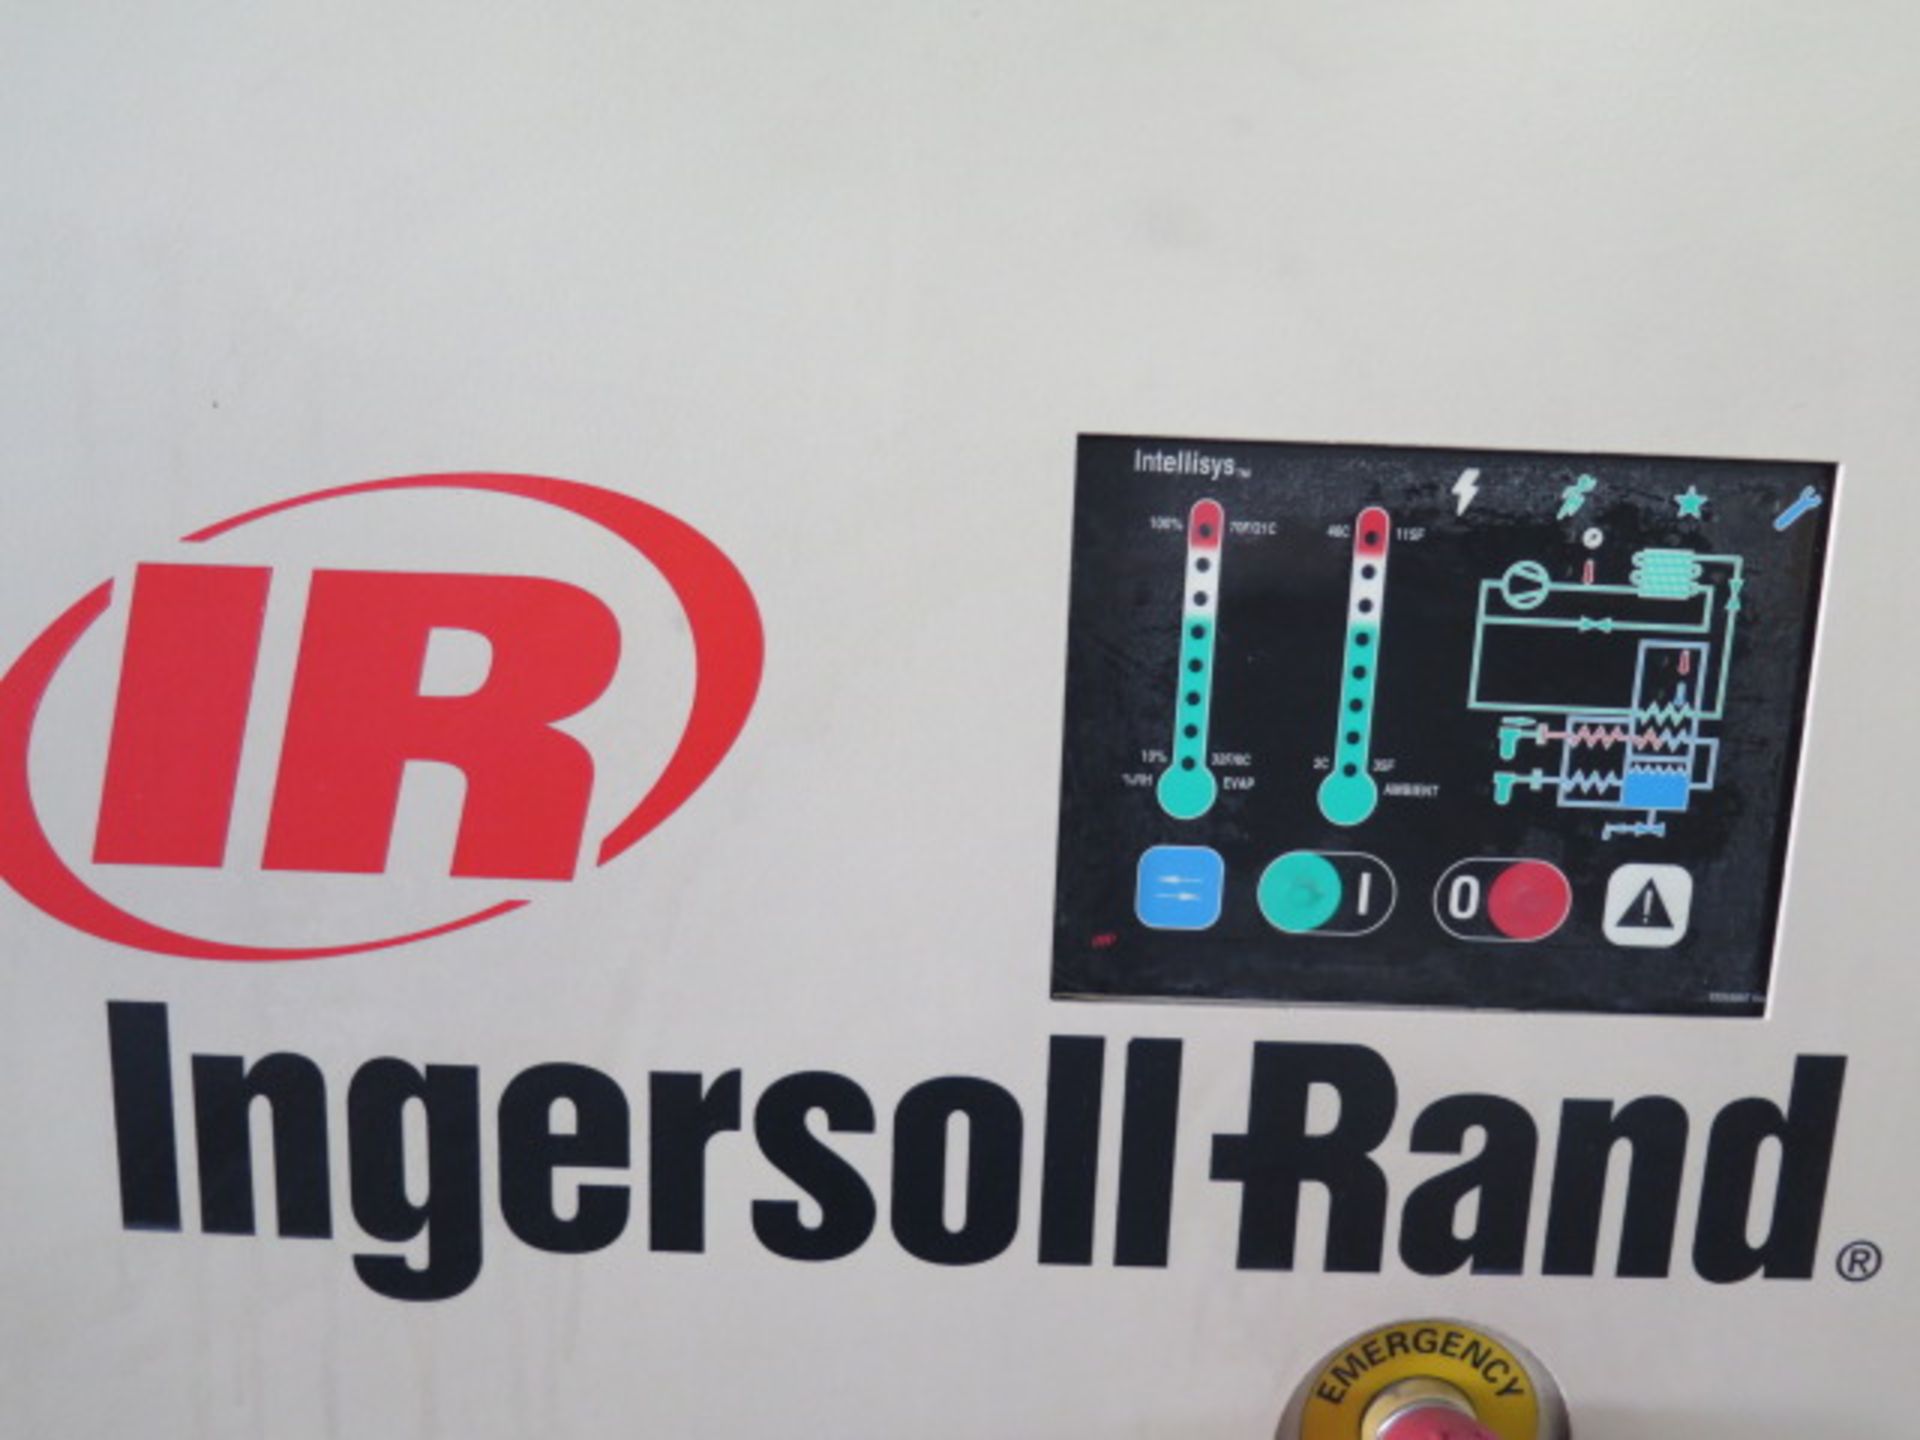 Ingersoll Rand TS1A Refrigerated Air Dryer - Image 2 of 3